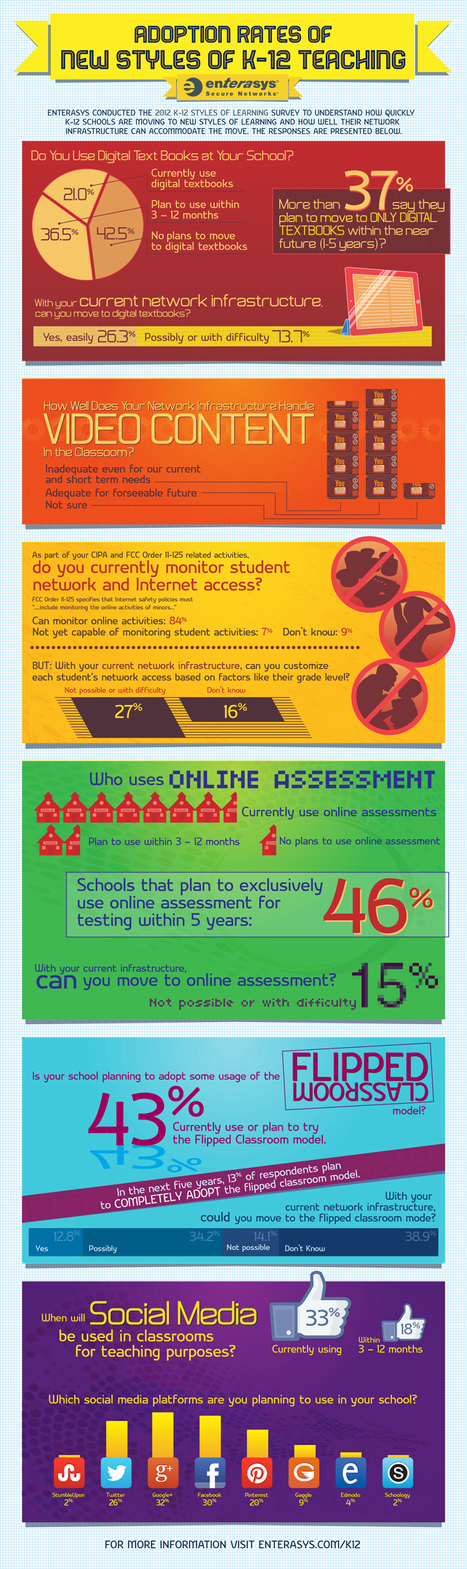 Adoption Rates of New Styles of K-12 Teaching [Infographic] - BYOD | 21st Century Learning and Teaching | Scoop.it